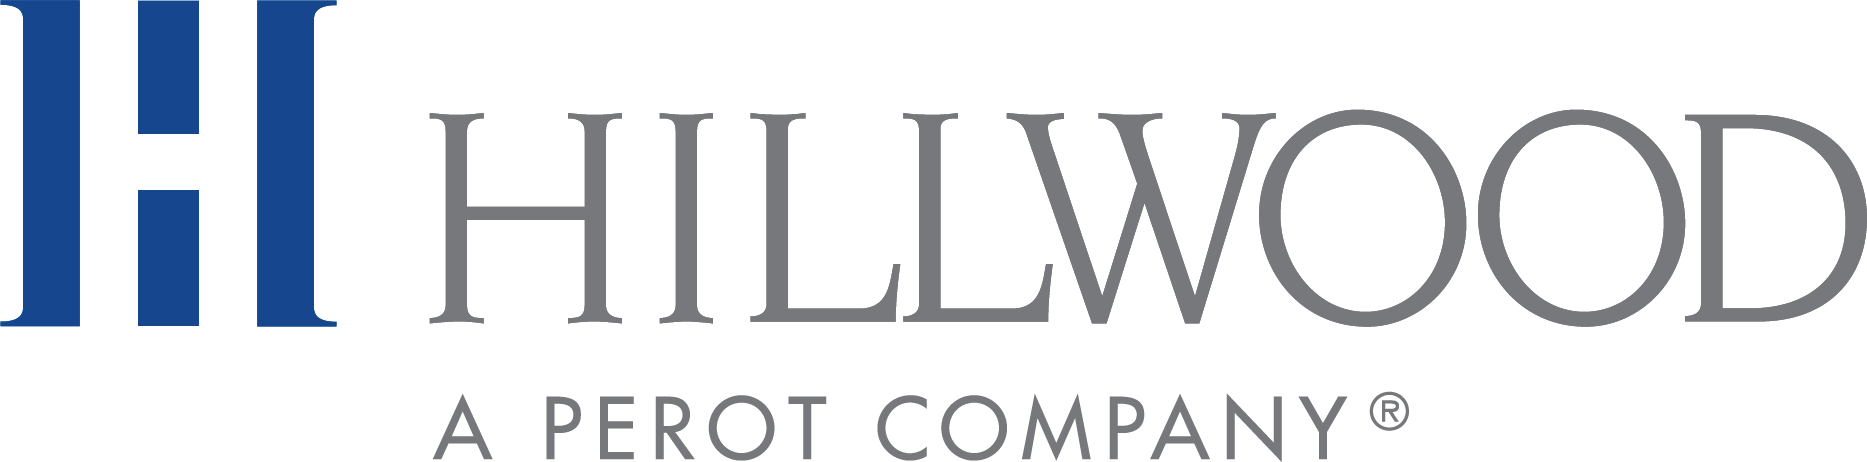 Hillwood a Perot Company